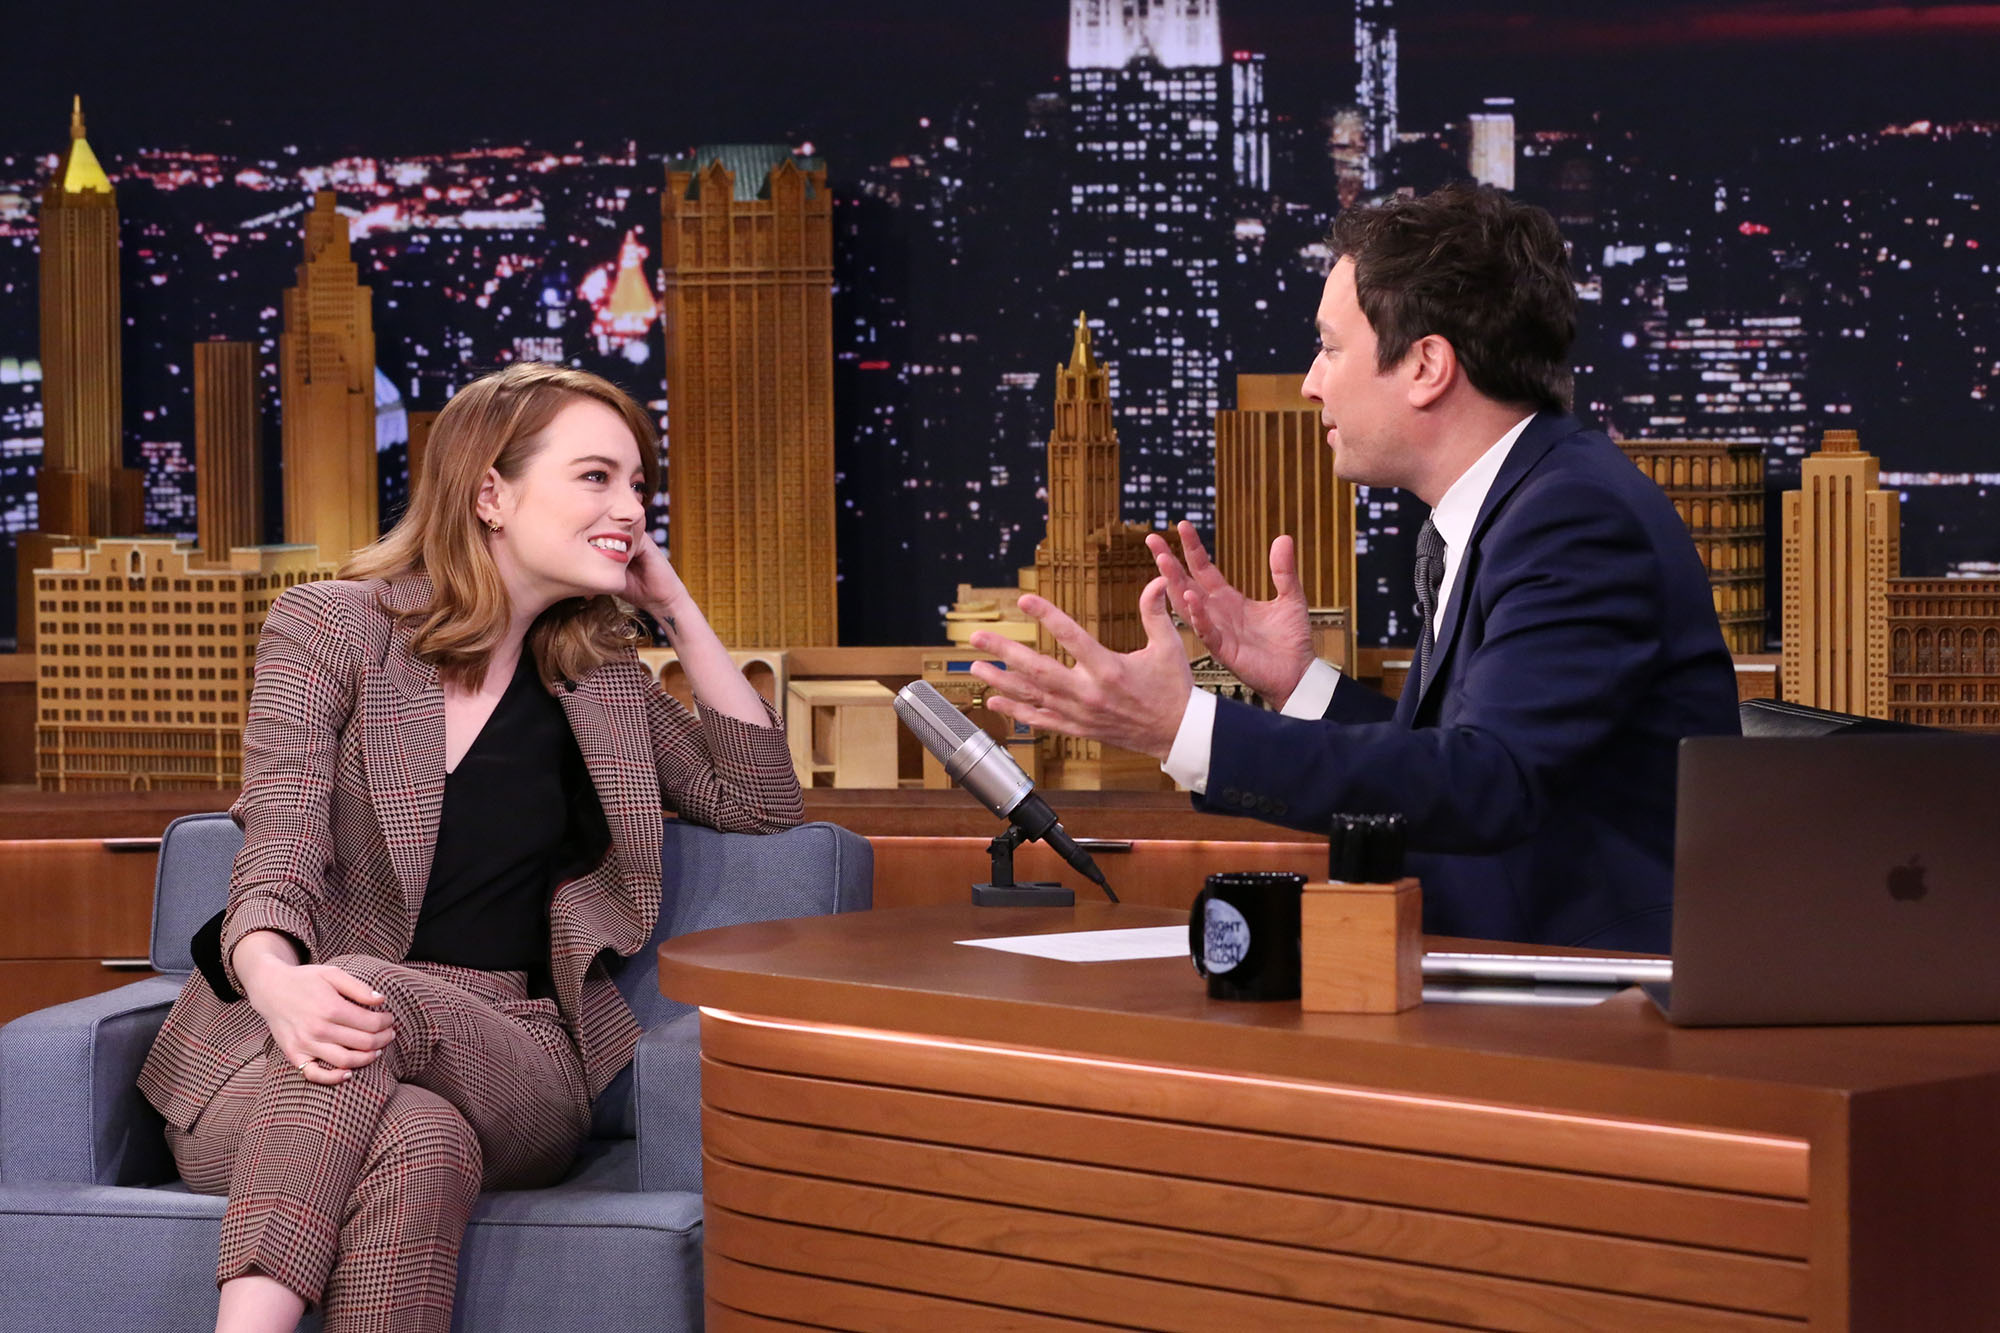 Emma Stone during an interview with 'The Tonight Show' host Jimmy Fallon on December 01, 2016 -- (Photo by: Andrew Lipovsky/NBC/NBCU Photo Bank via Getty Images) (NBC—NBCU Photo Bank via Getty Images)